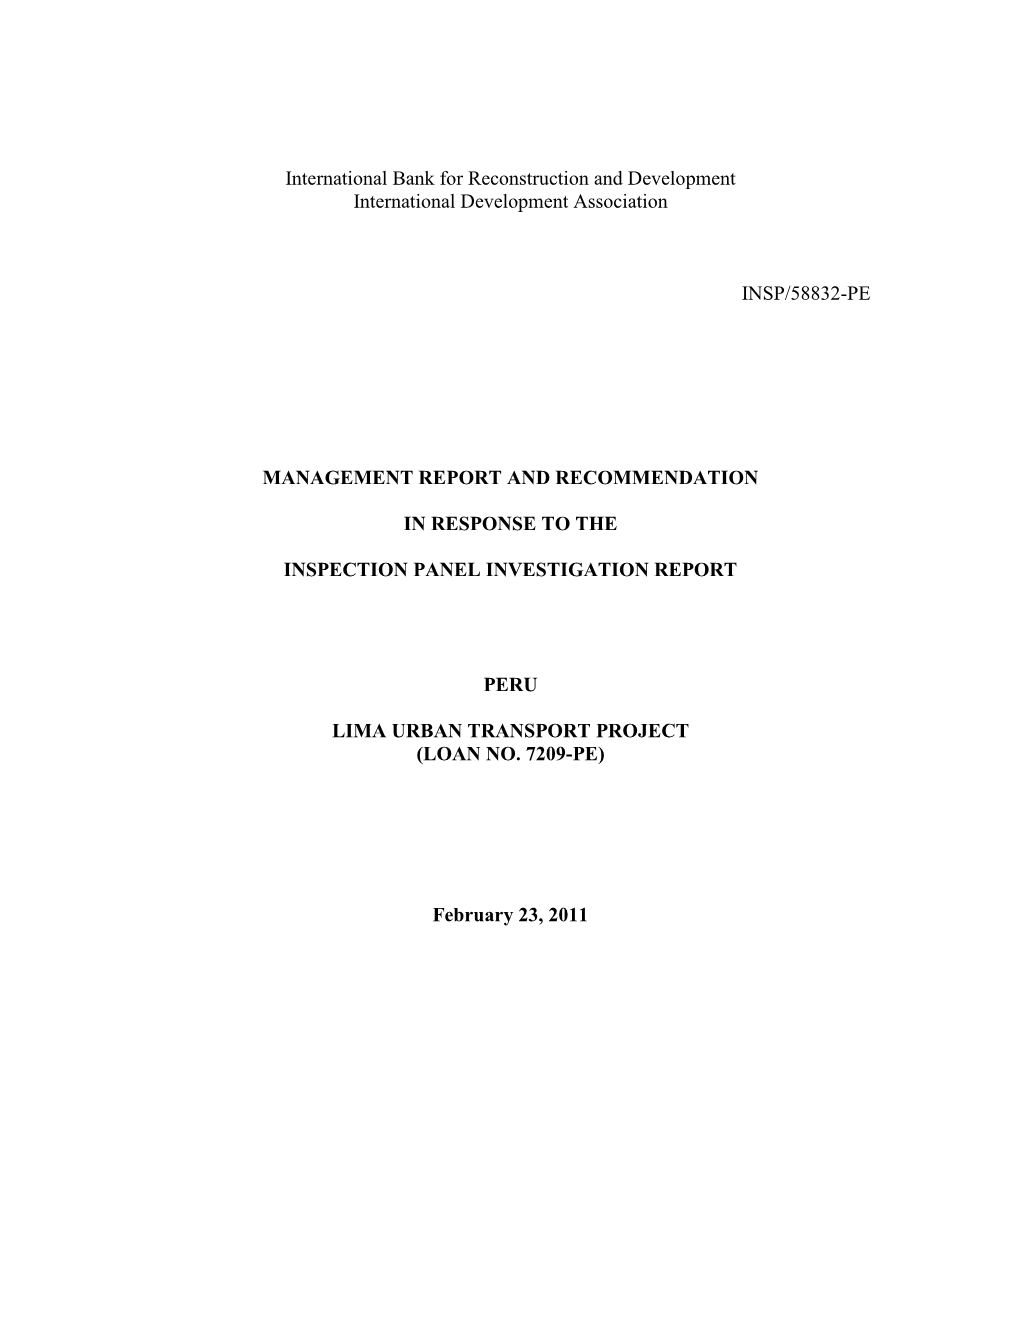 61-Management Report and Recommendation